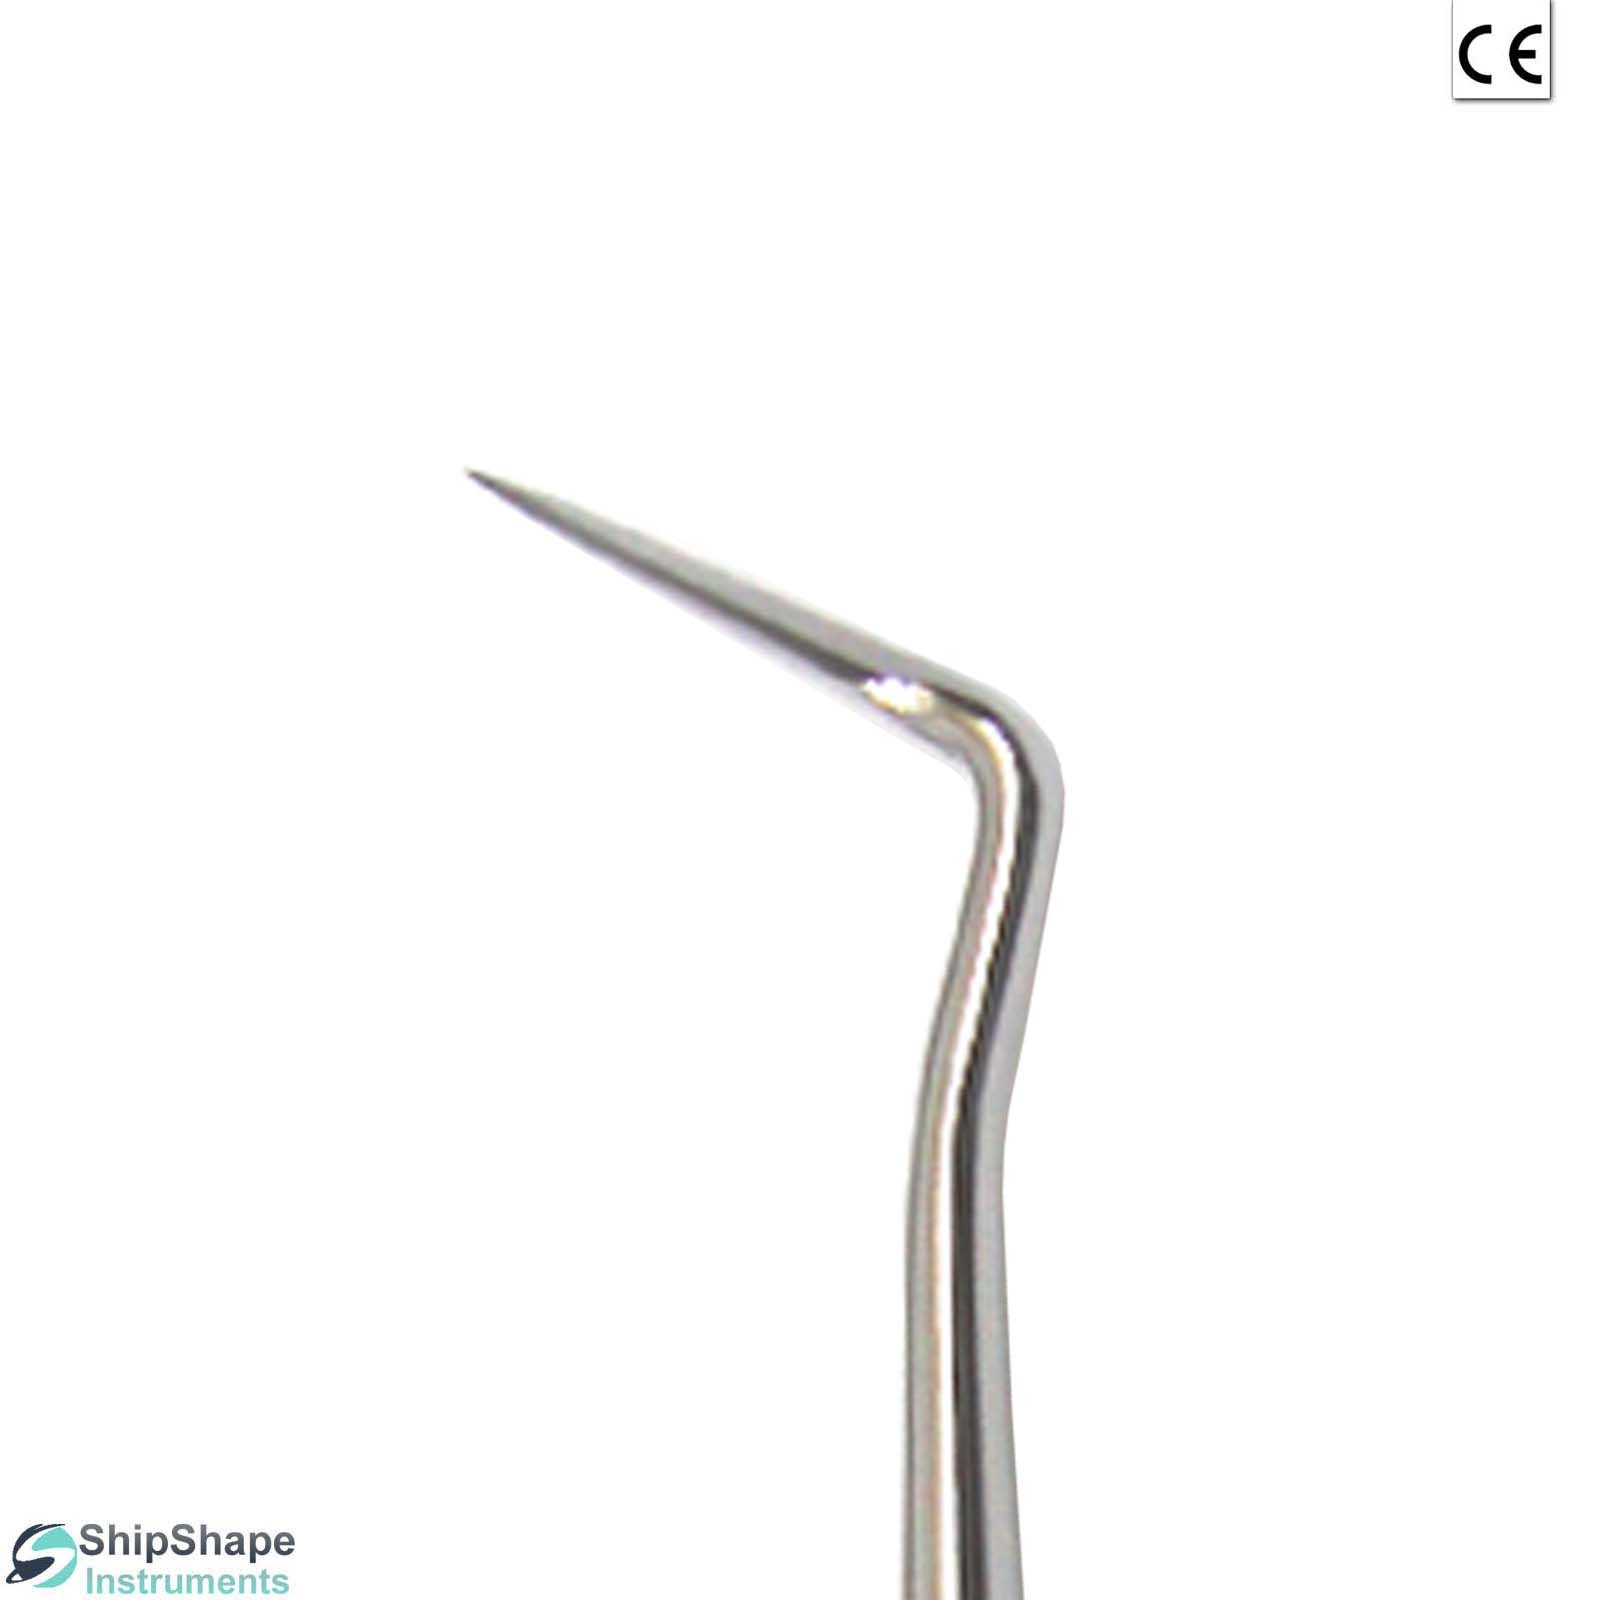 5/6 Buck Periodontal Knife Recontour Soft Tissue Surgical Detal Gingival Knives-800